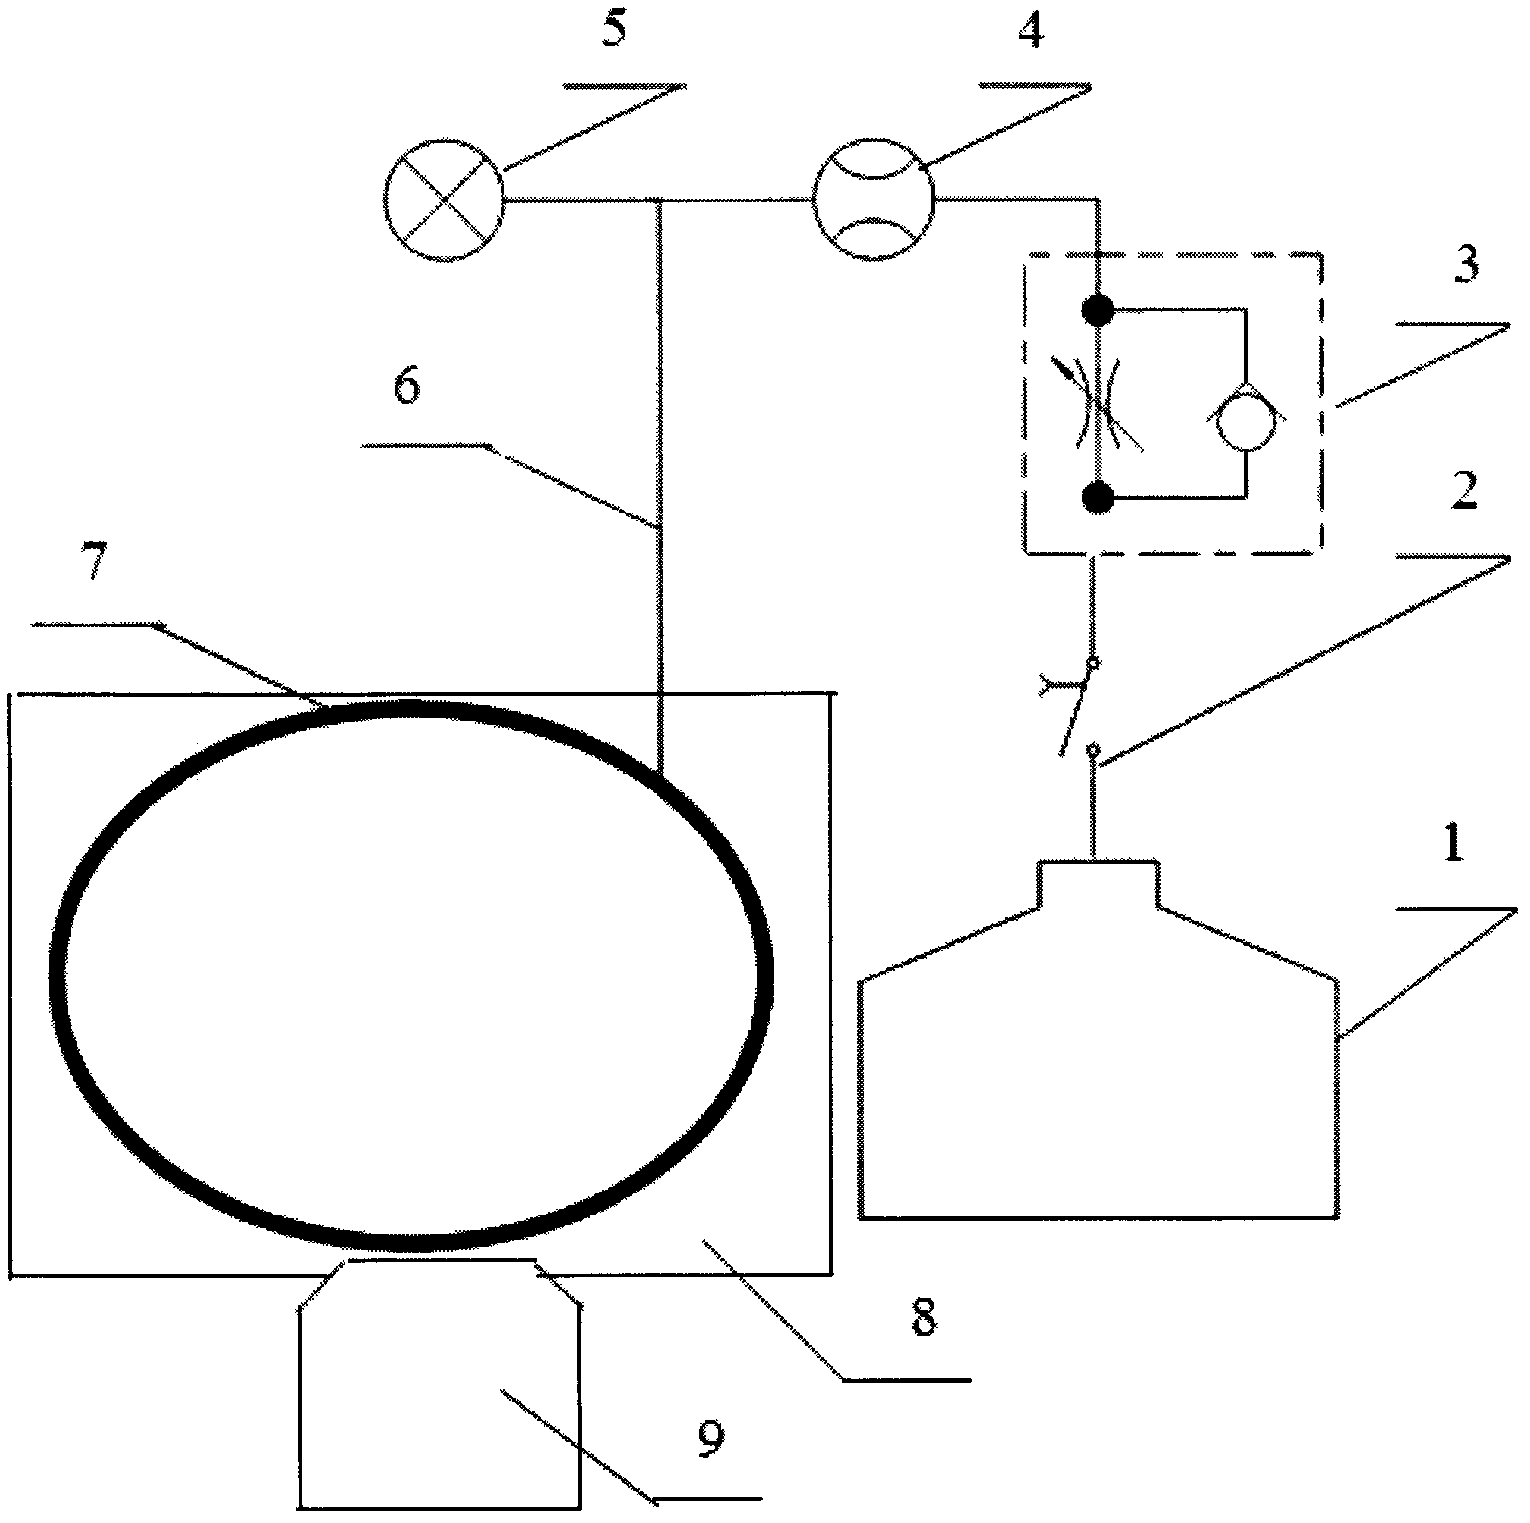 Lubrication simulation device for piston ring and cylinder sleeve of engine